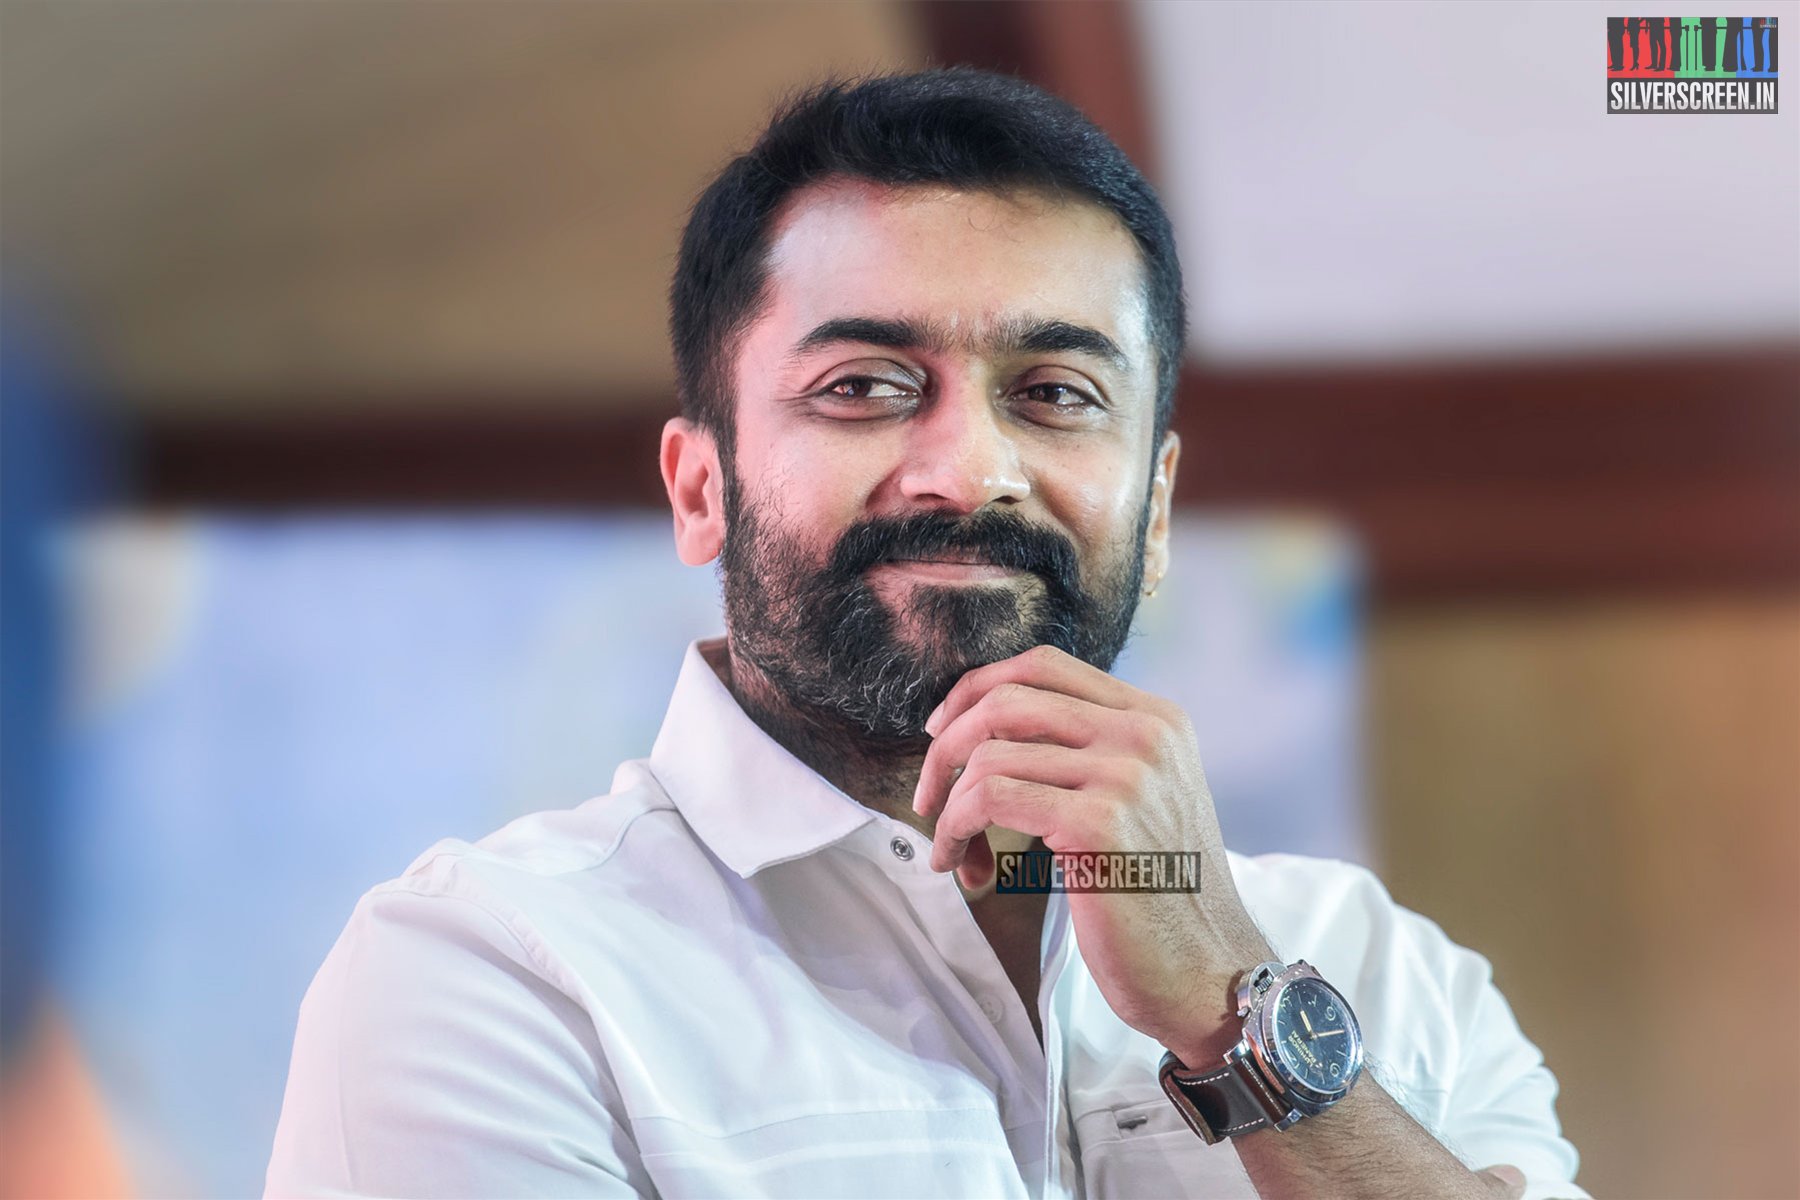 Following Subasri's death, Suriya, Vijay and Mammootty Say No To Banners Or  Cut-Outs For Their Upcoming Films | Silverscreen India